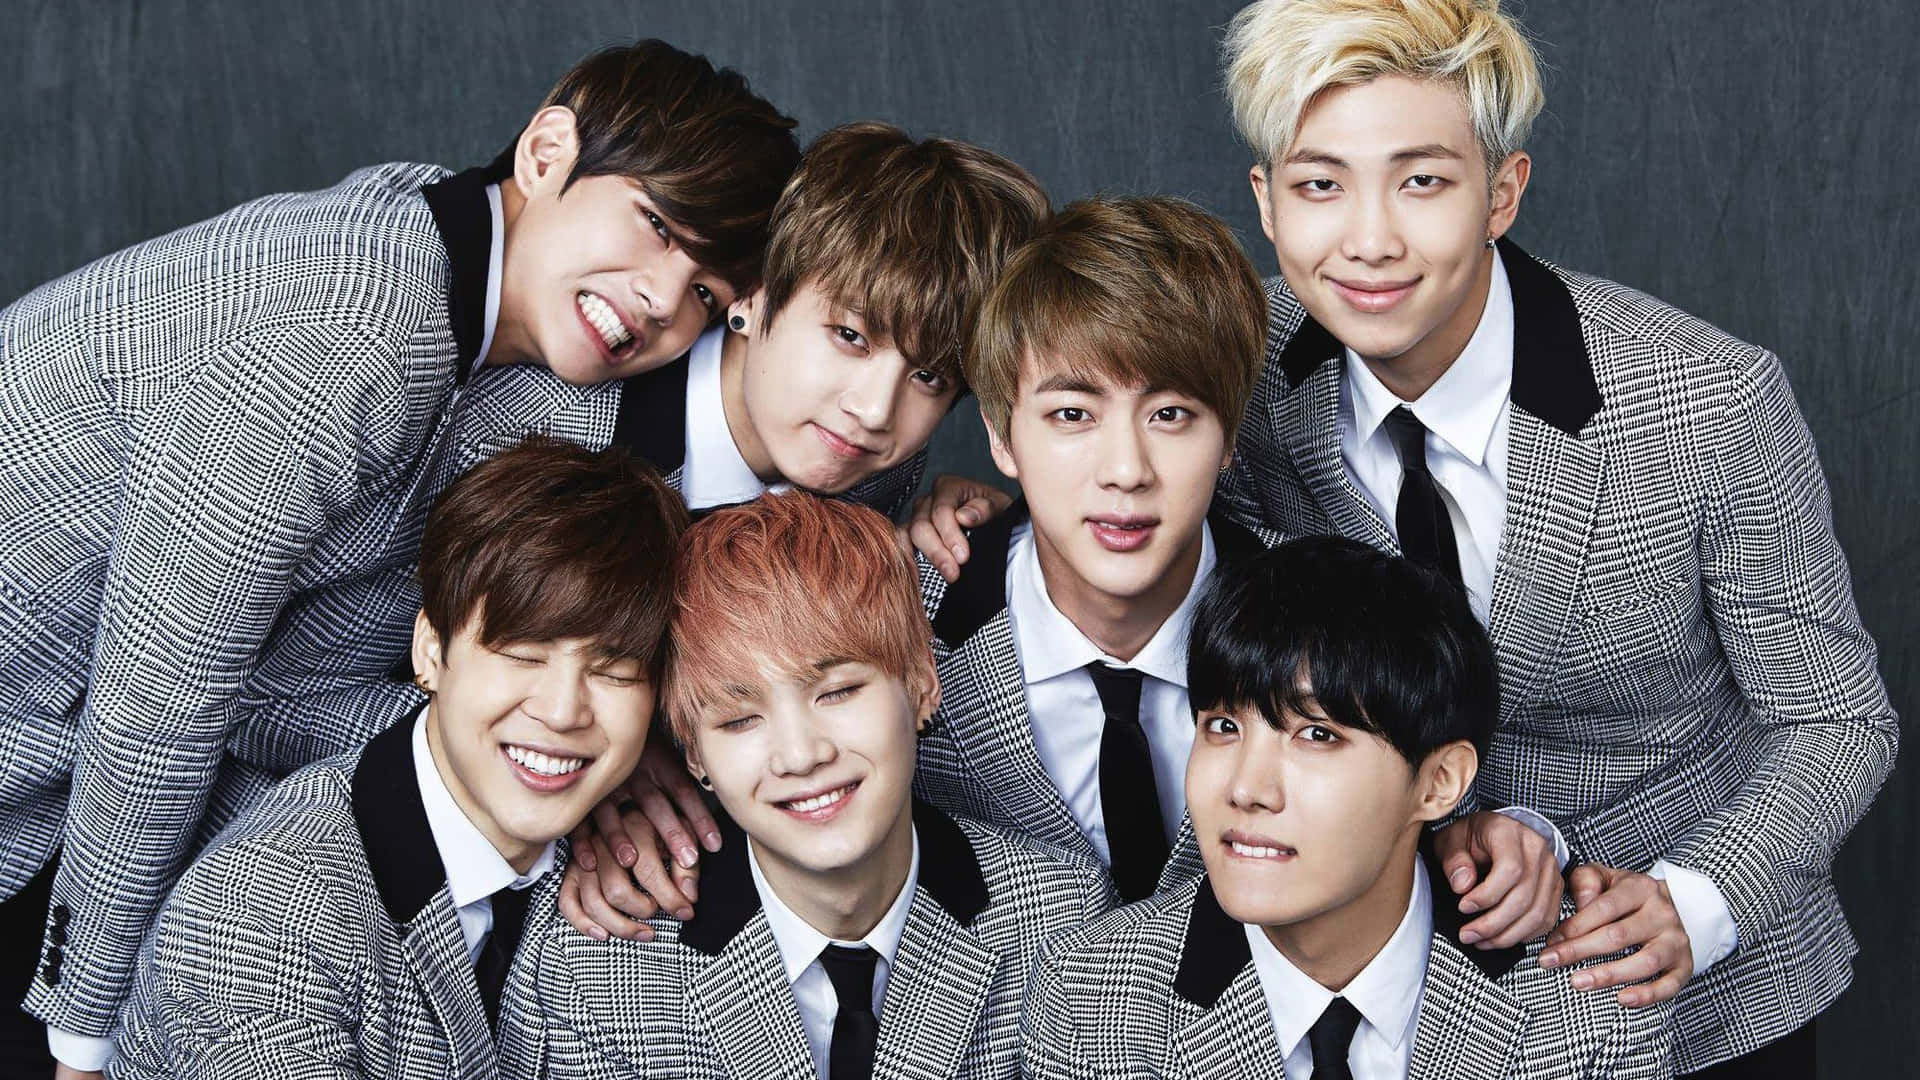 Bts - A Group Of Young Men Posing For A Picture